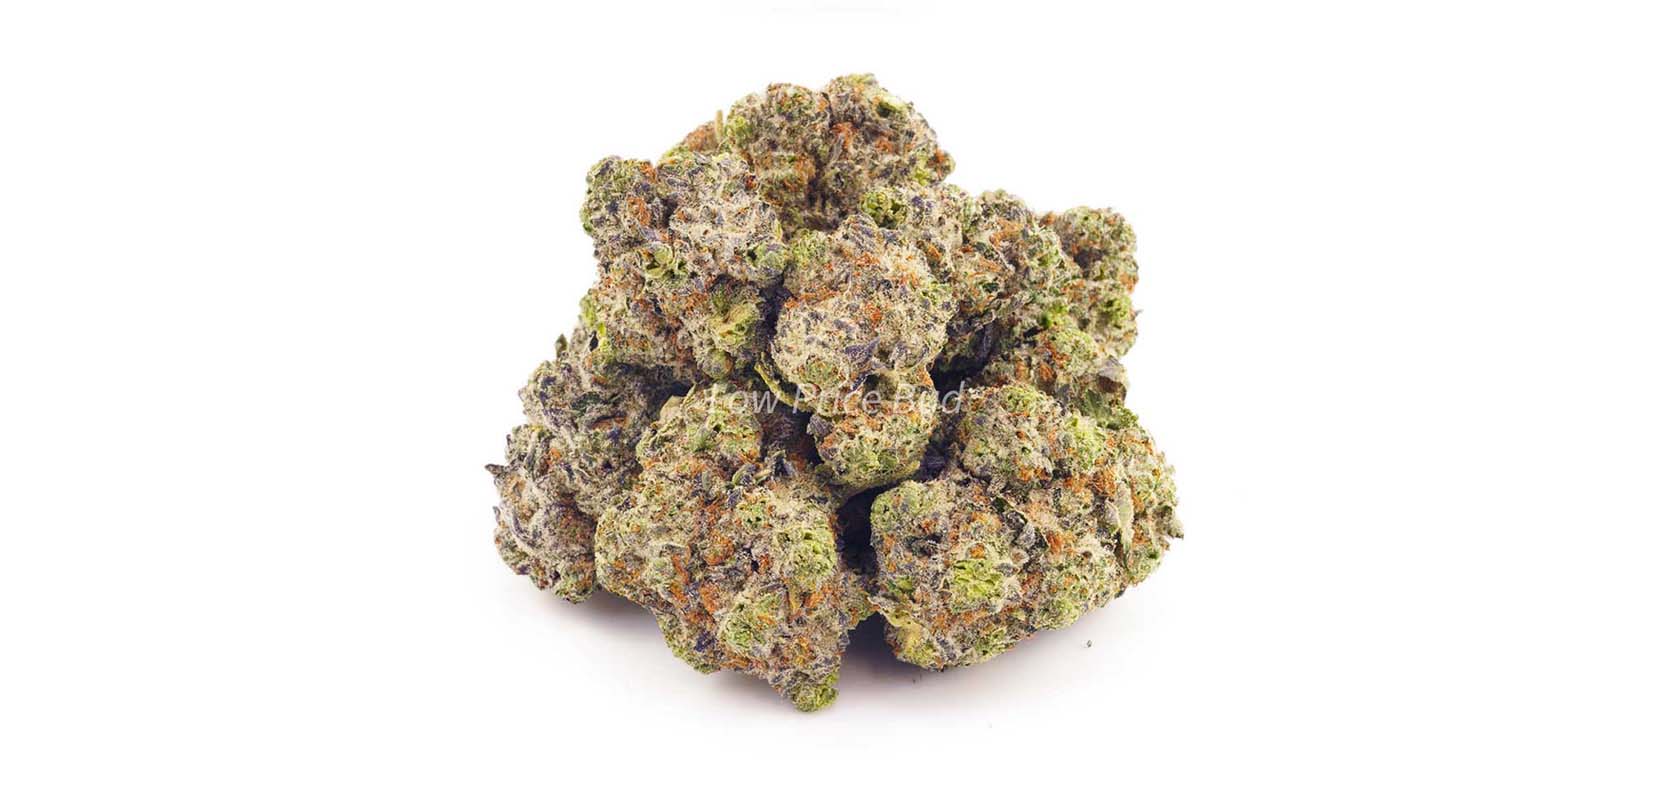 Lemon Pound Cake weed online from weed dispensary for BC cannabis. buy weeds online. pot shop. cannabis dispensary.